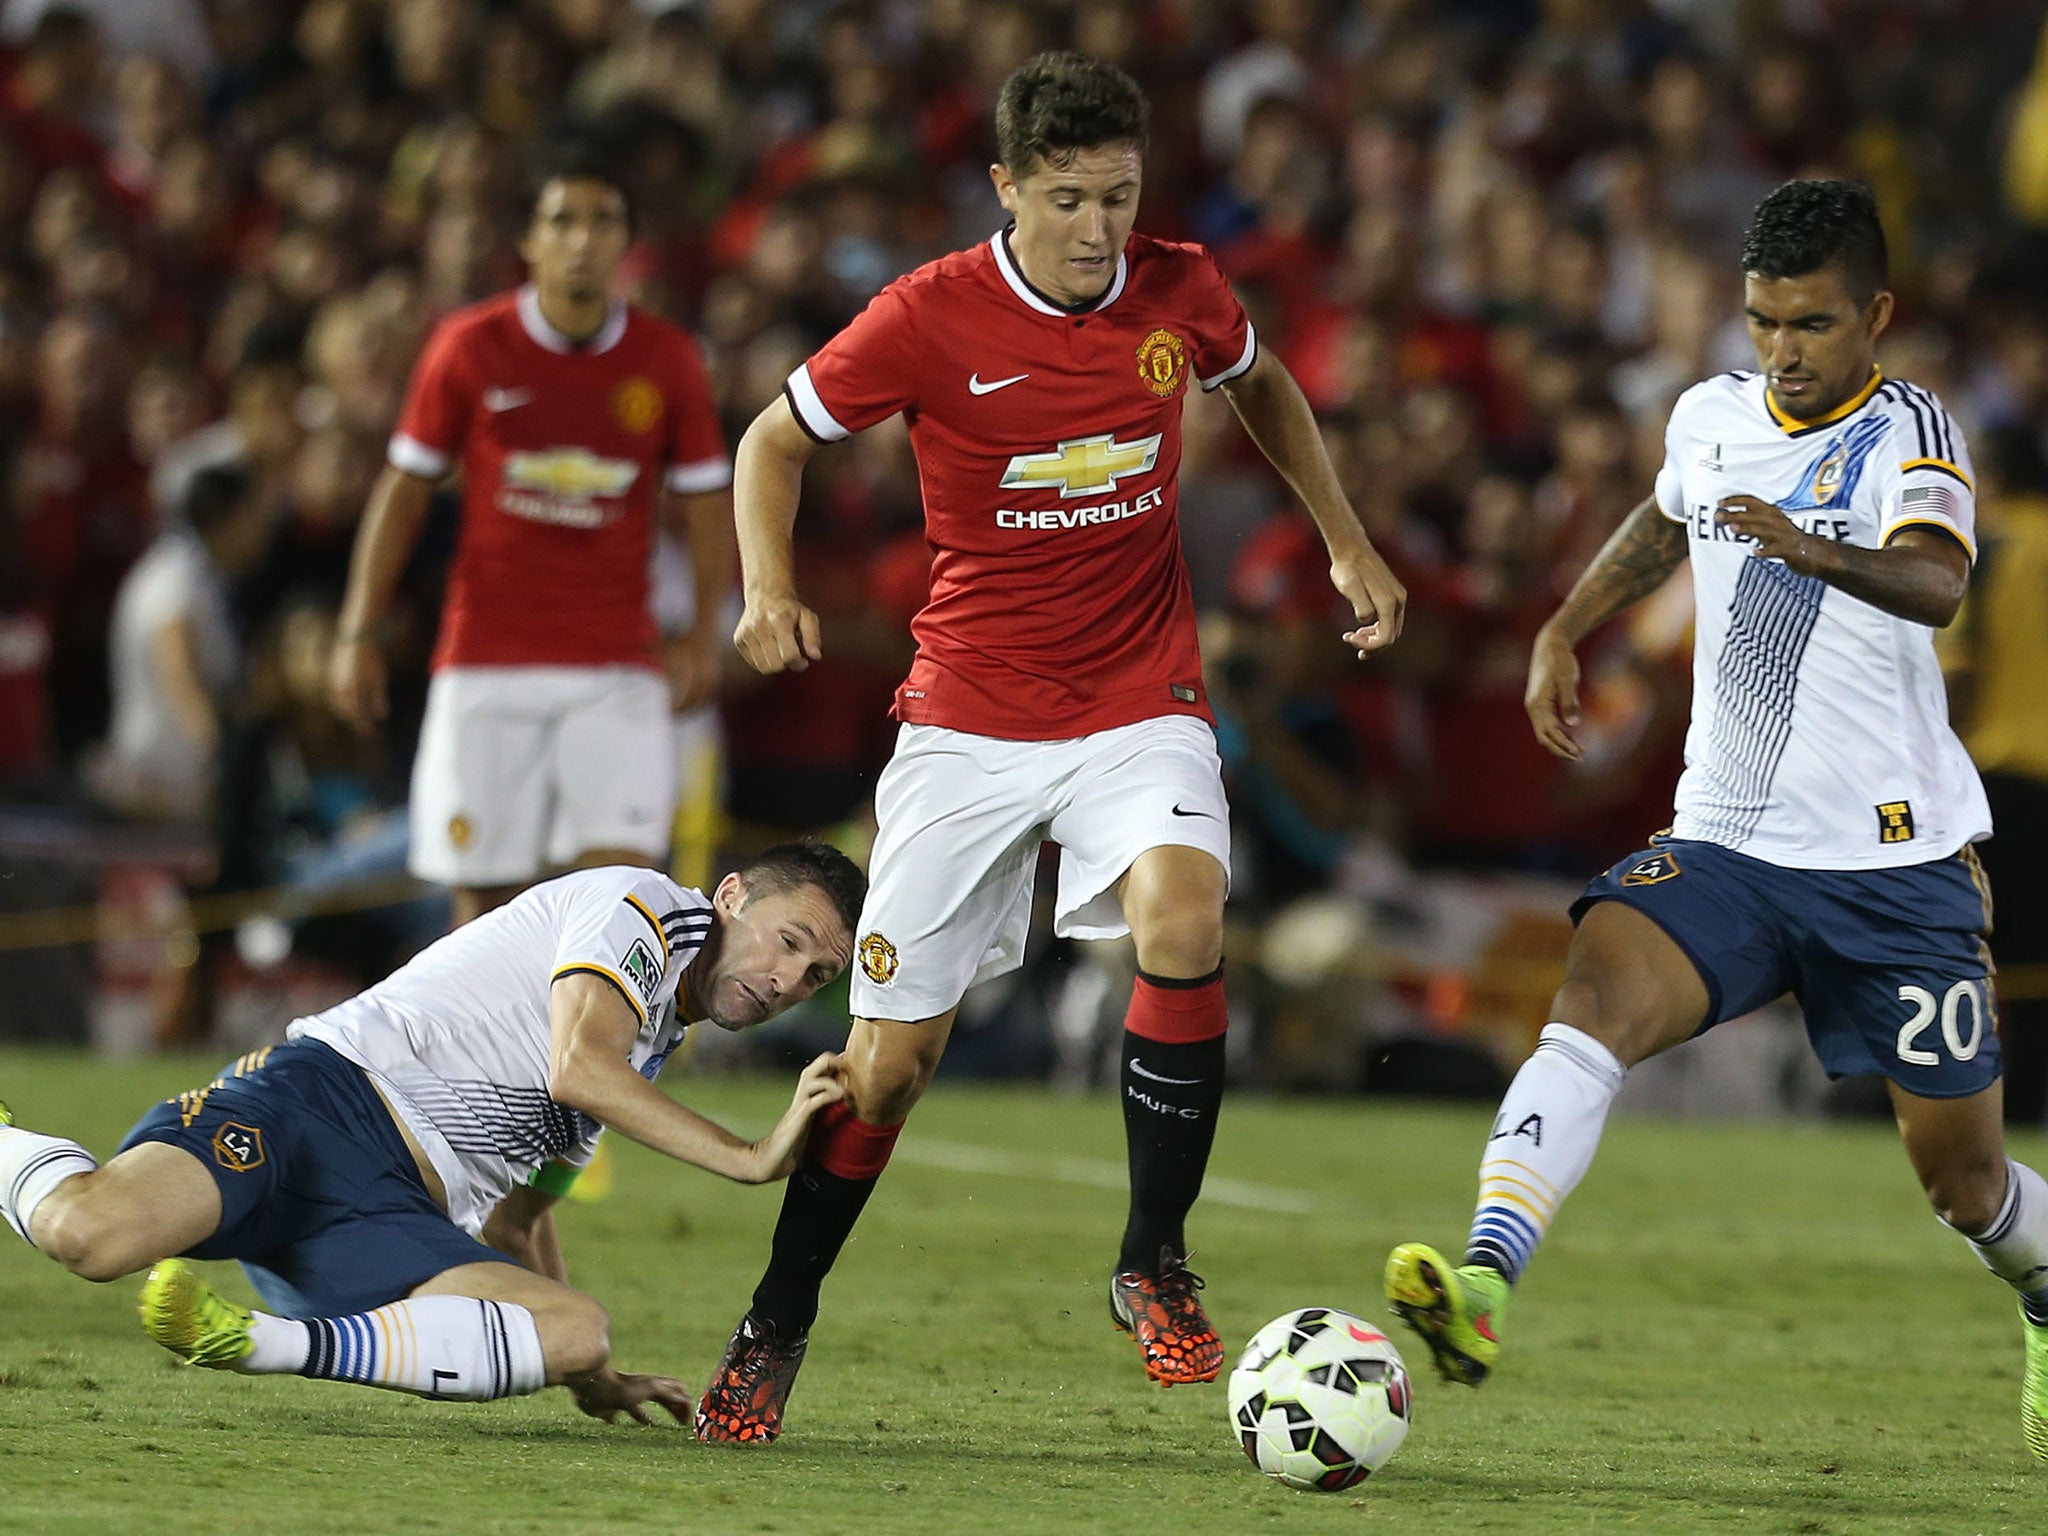 Ander Herrera made his debut for Manchester United in the 7-0 victory over LA Galaxy